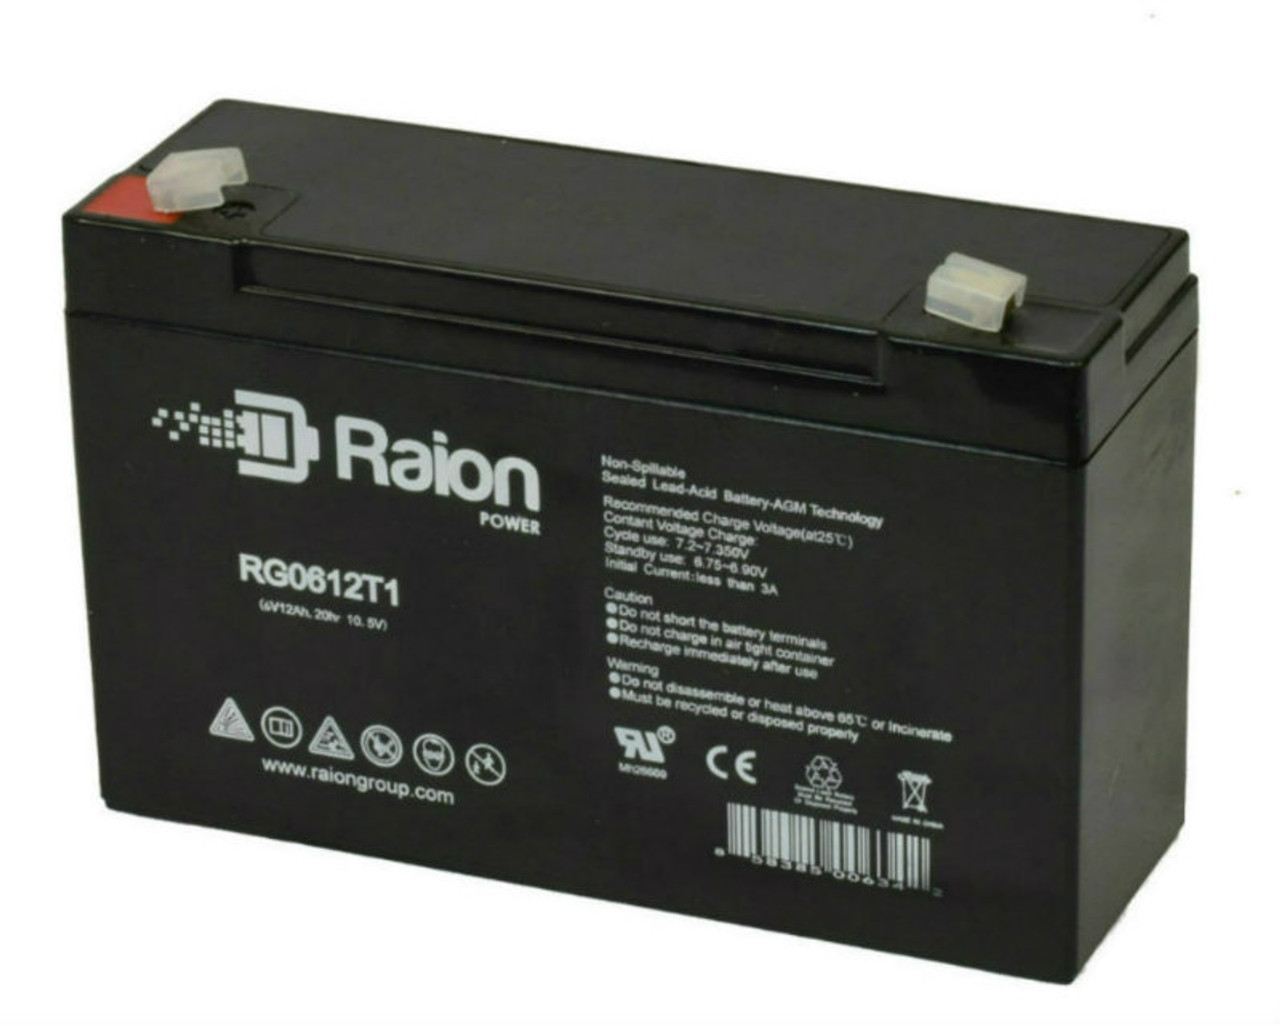 Raion Power RG06120T1 Replacement Emergency Light Battery for Carpenter Watchman 713523